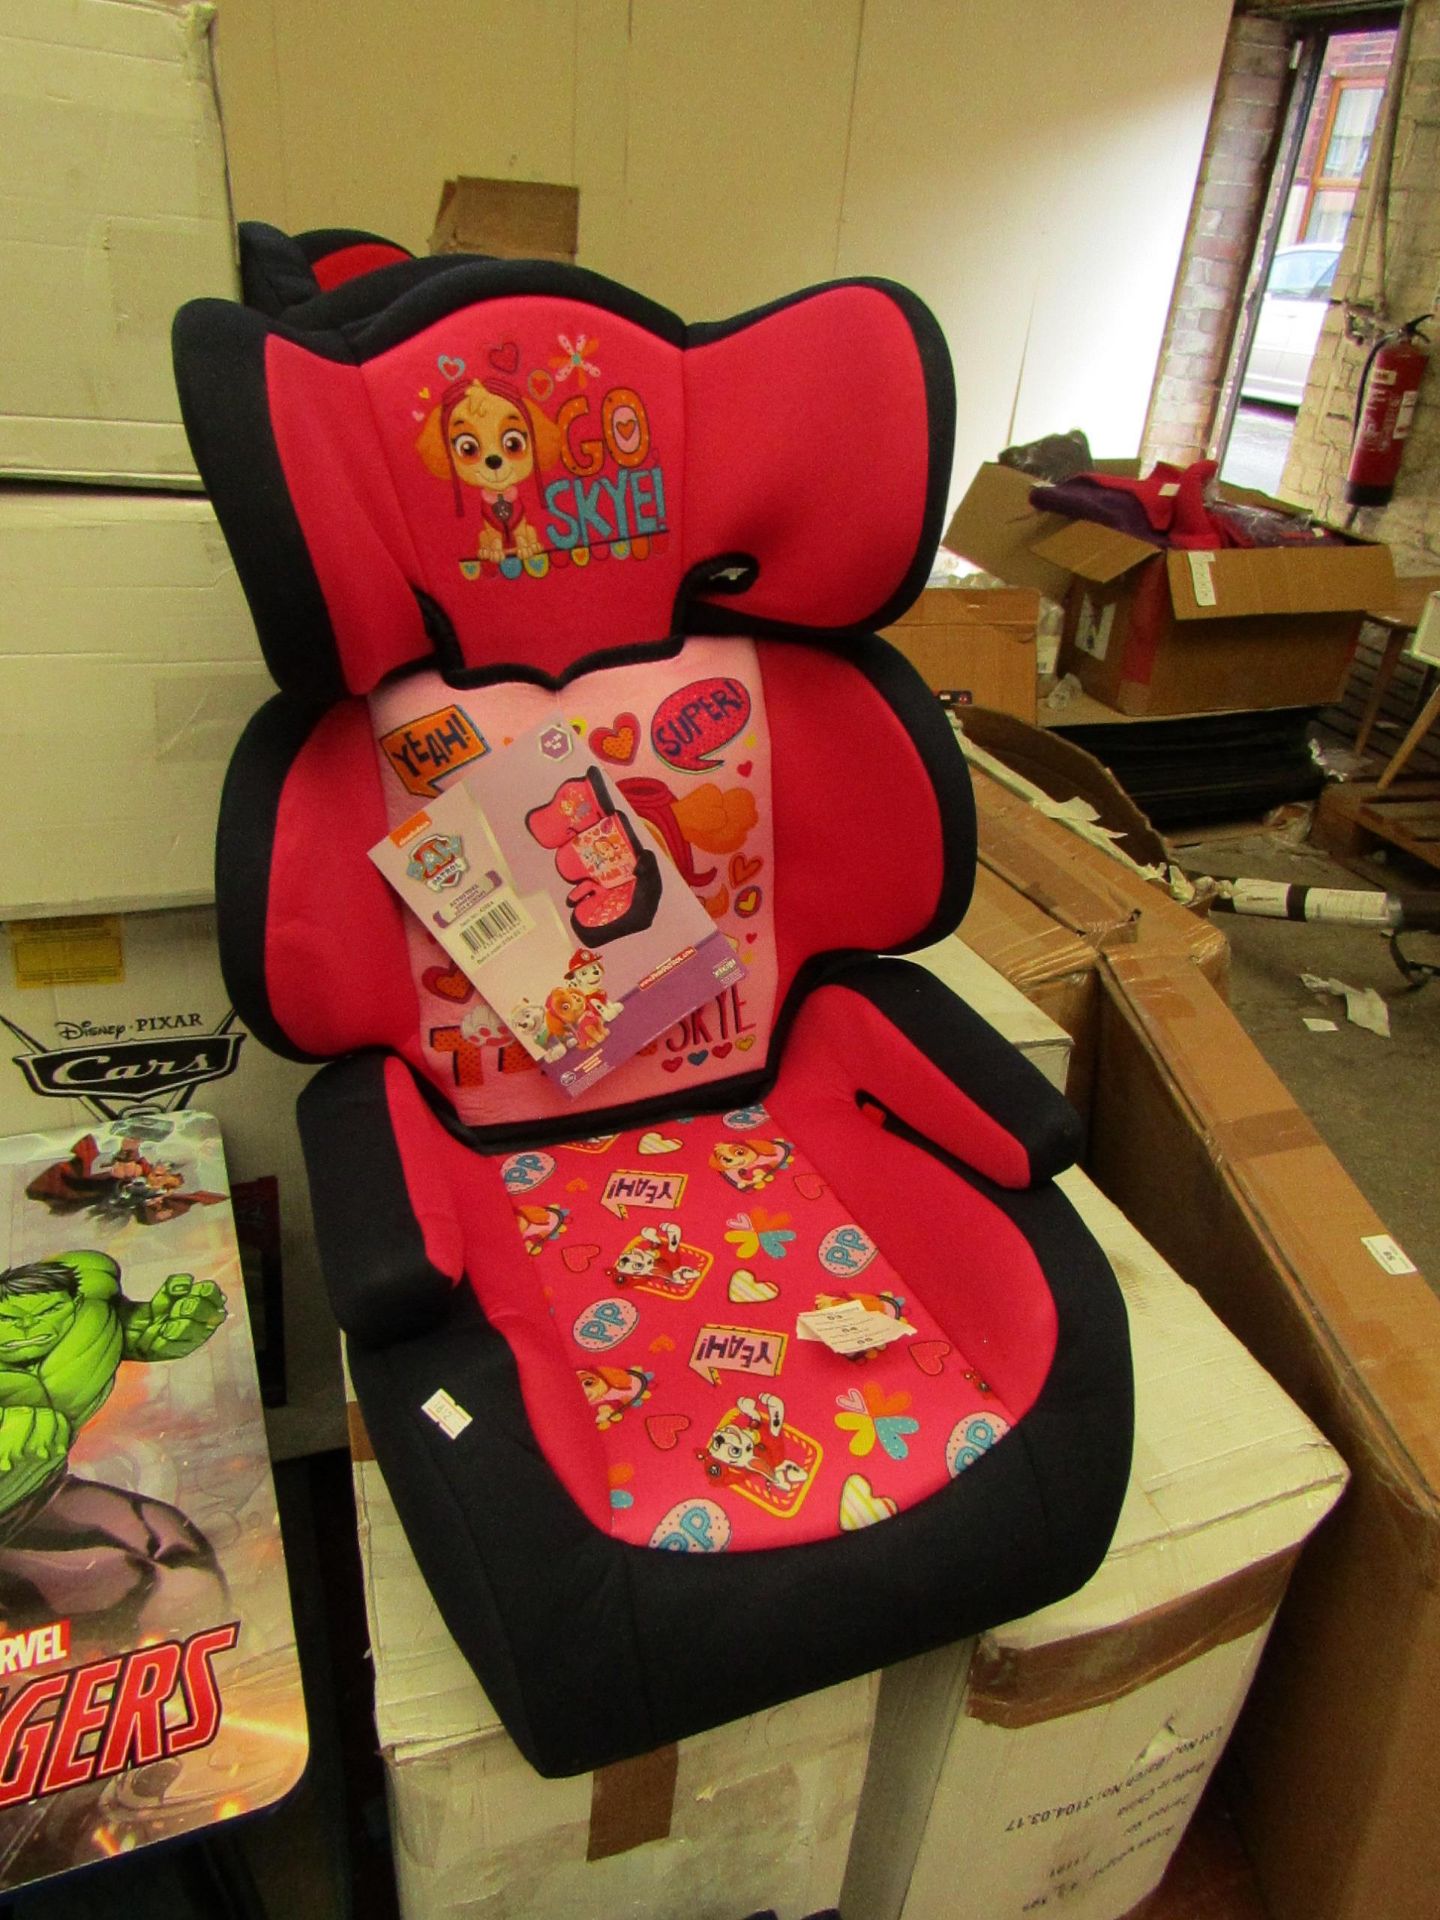 Nickelodeon - Paw Patrol (Girls) - Car Seat (43 x 28.5 x 62cm) - All Unchecked but look New & Boxed.